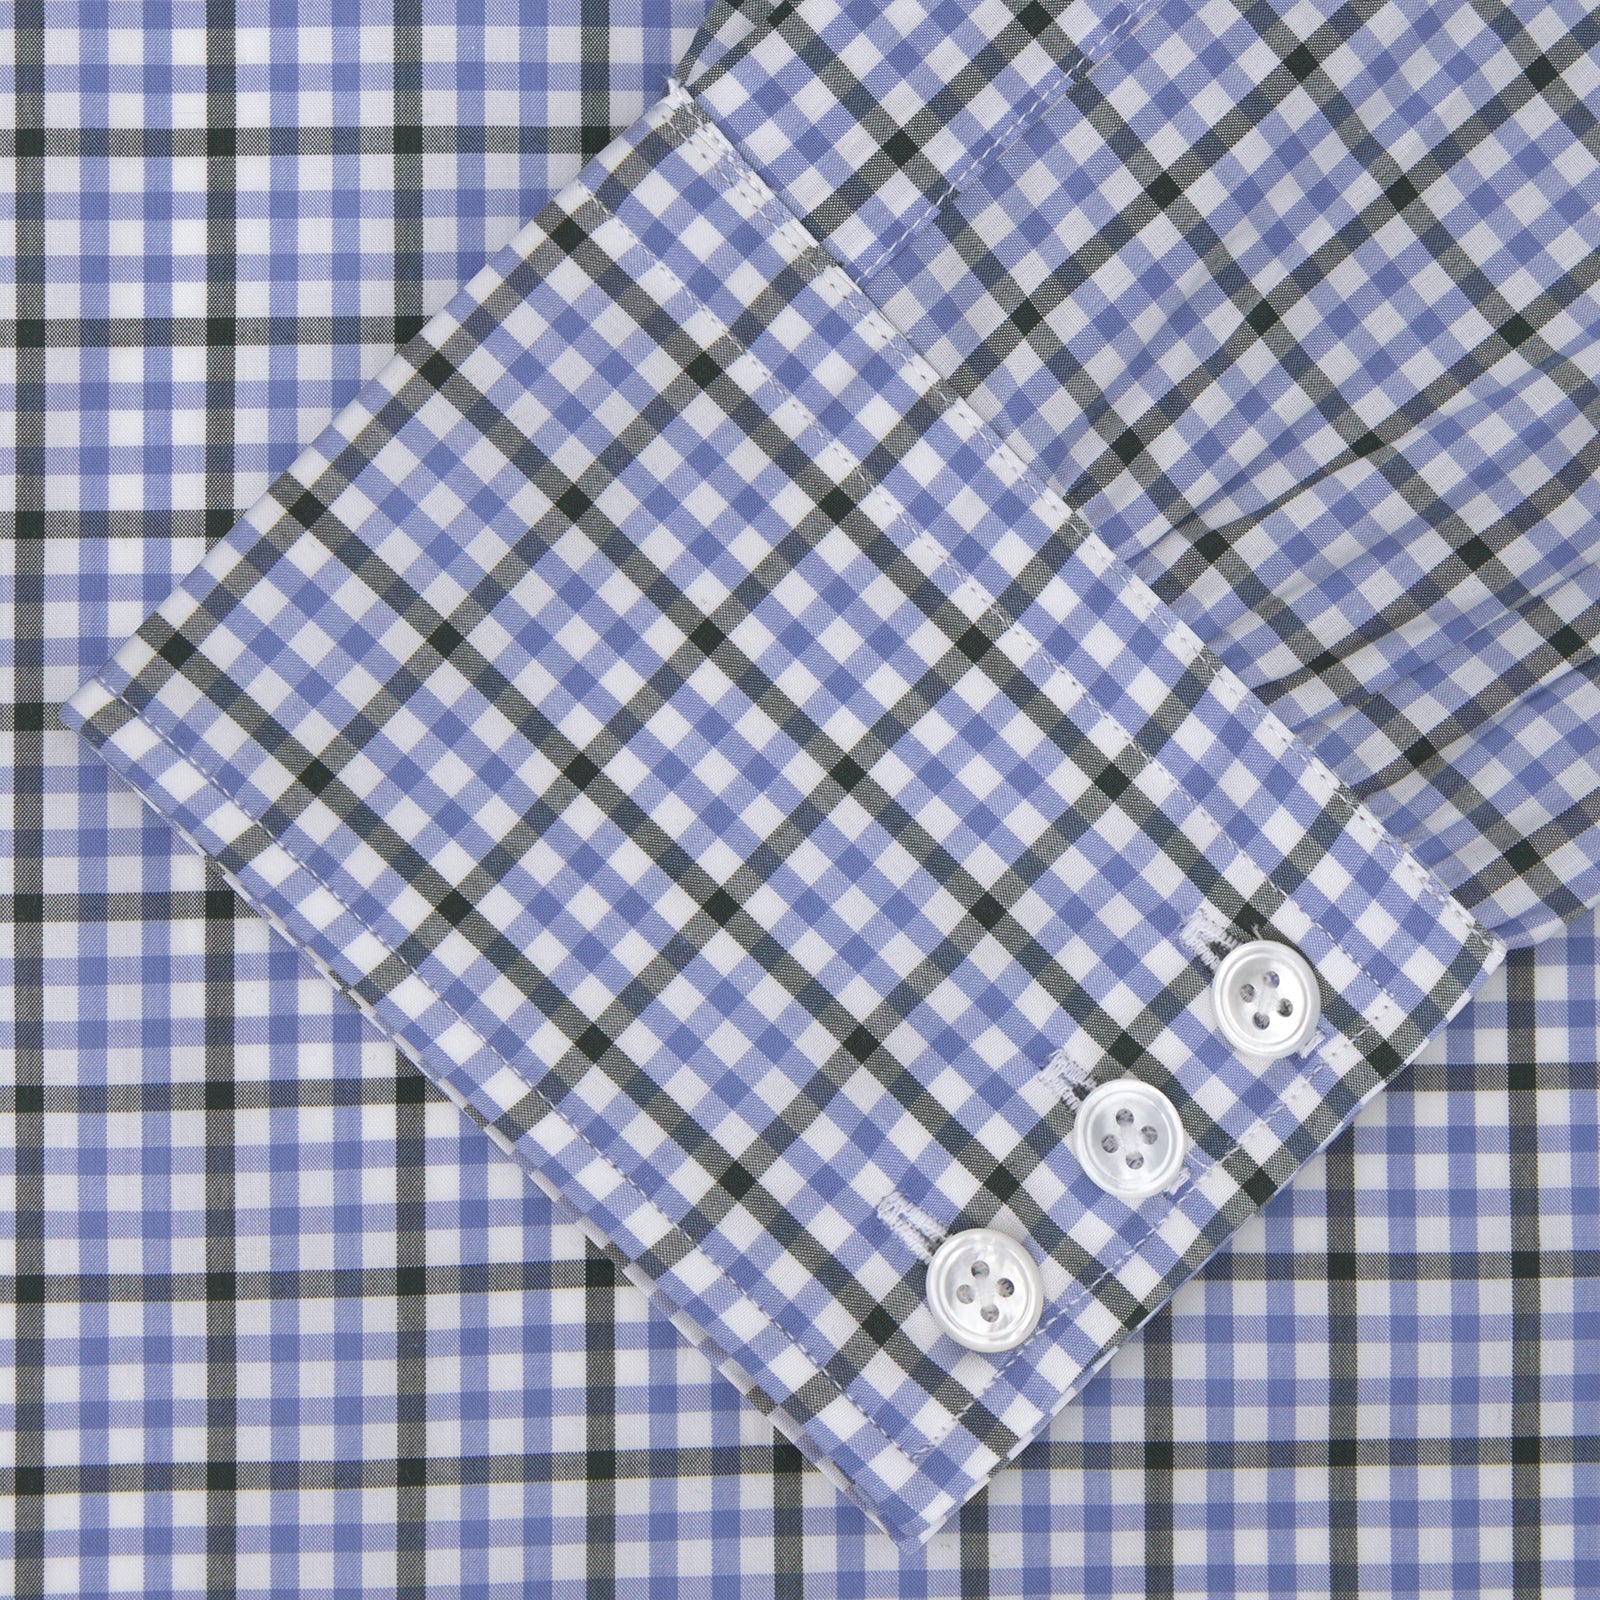 Light Blue and Grey Gingham Check Cotton Shirt with T&A Collar and 3-Button Cuffs